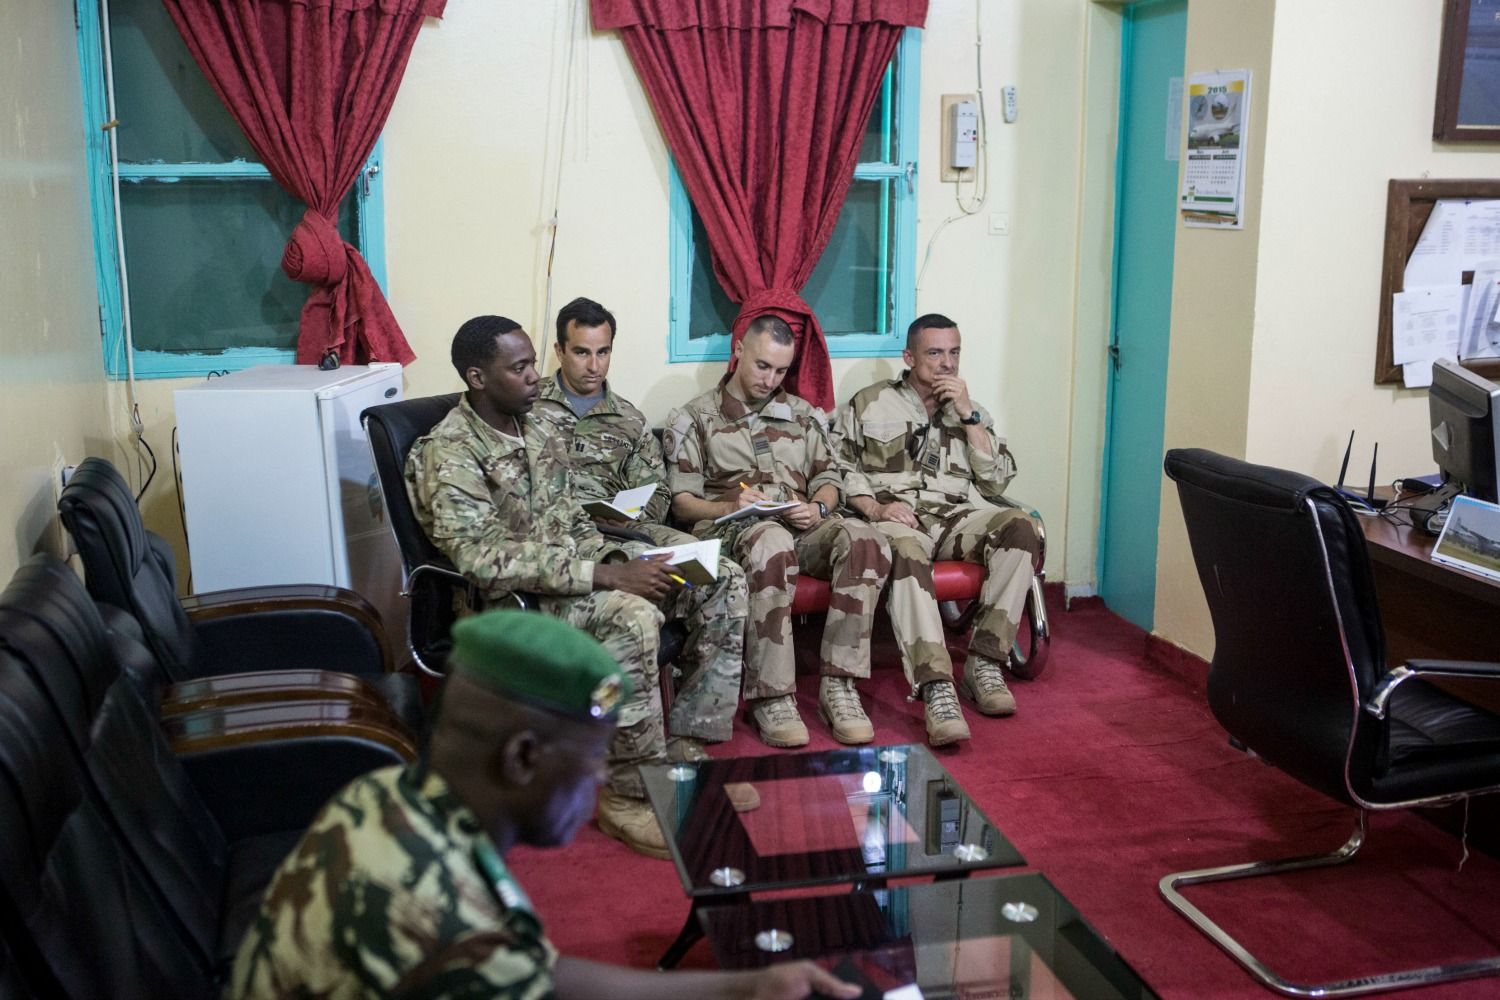 American and French soldiers attend a daily briefing with the Nigerien military commander in charge 
of the fight against Boko Haram at a Nigerien military base in Diffa, Niger. Image by Joe Penney. Niger, 2018.